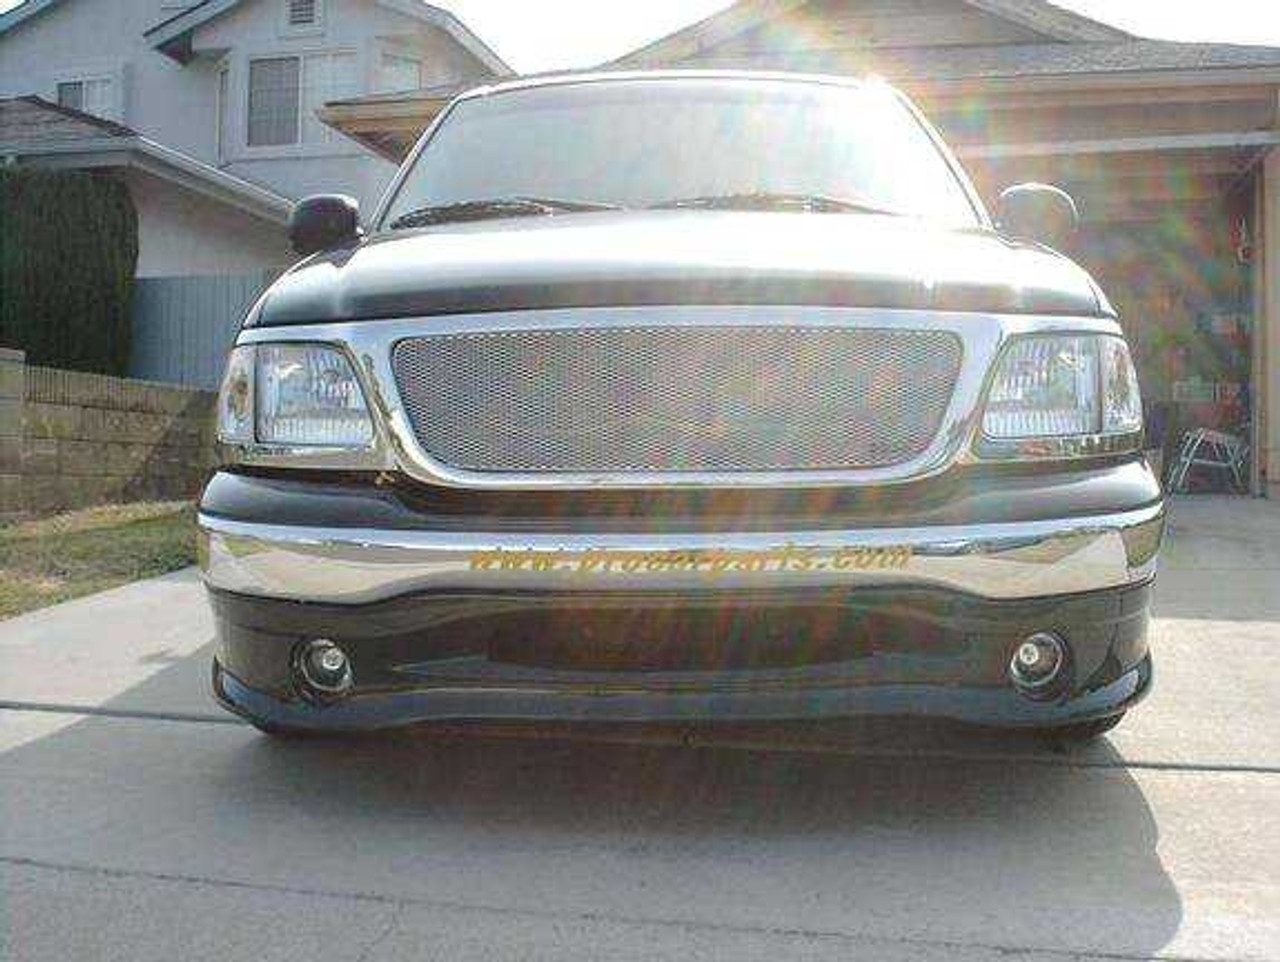 BlingLights Brand Fog Lamps for 1997-2002 Ford Expedition with ATS Body Kit